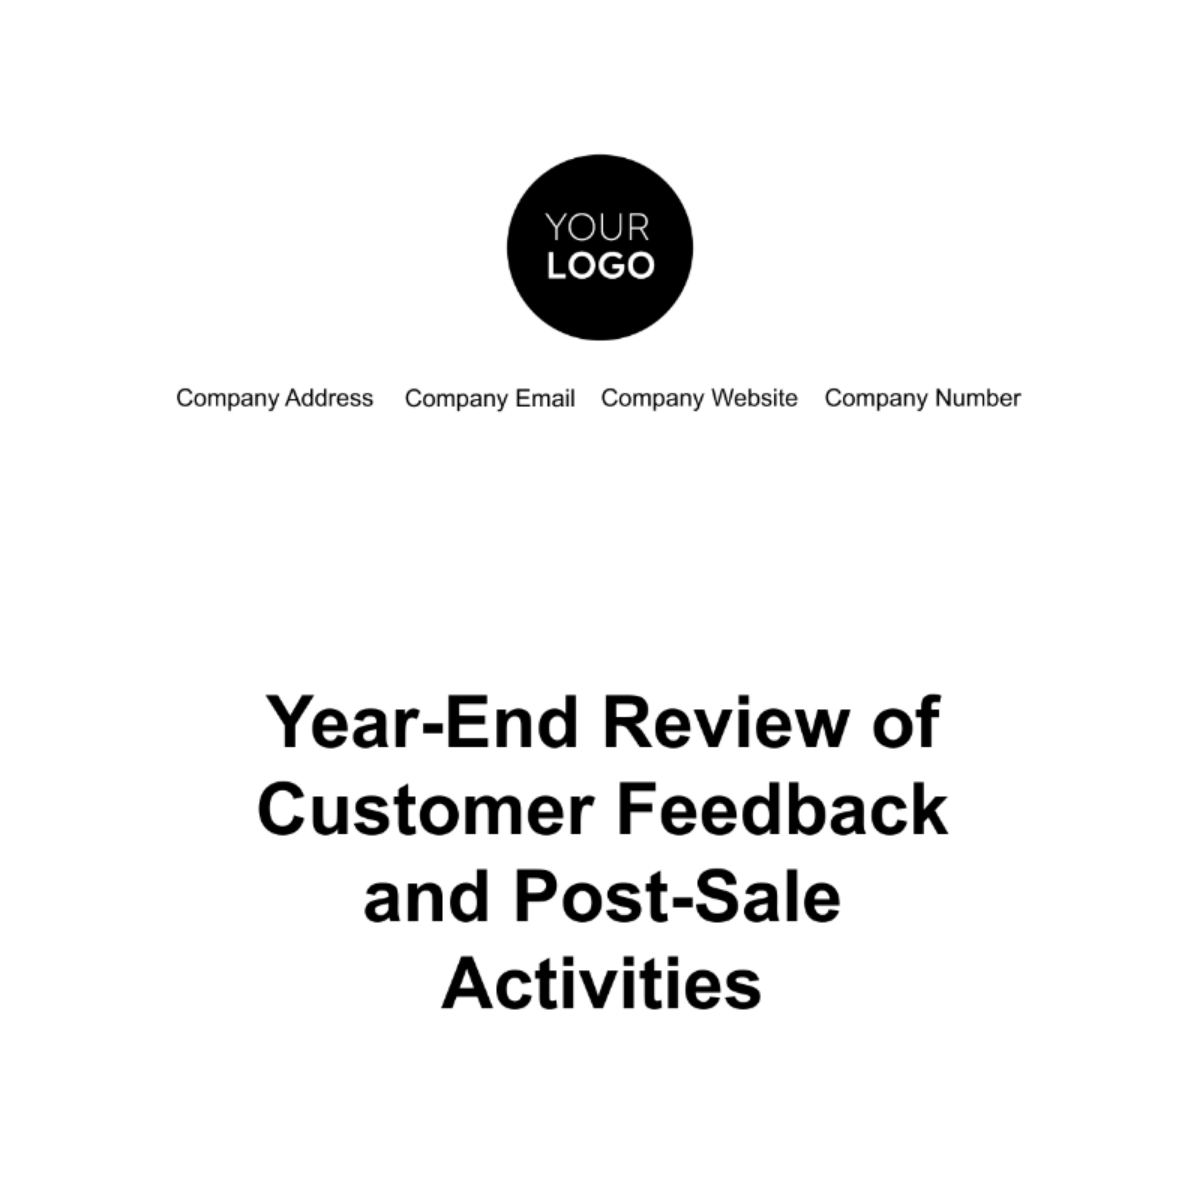 Year-end Review of Customer Feedback and Post-Sale Activities Template